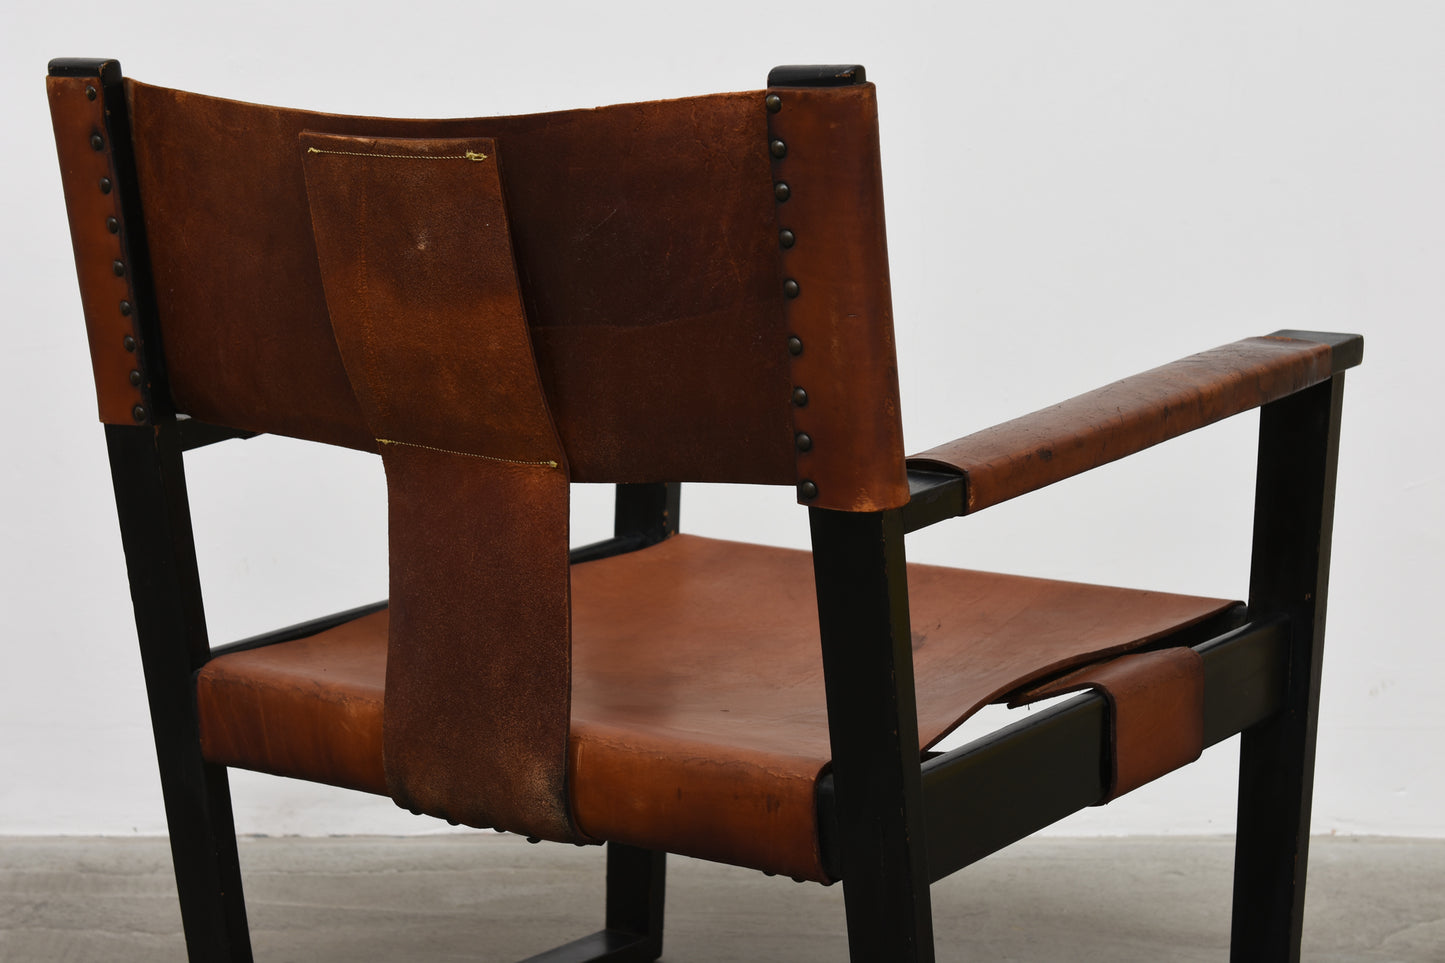 1960s saddle leather lounger